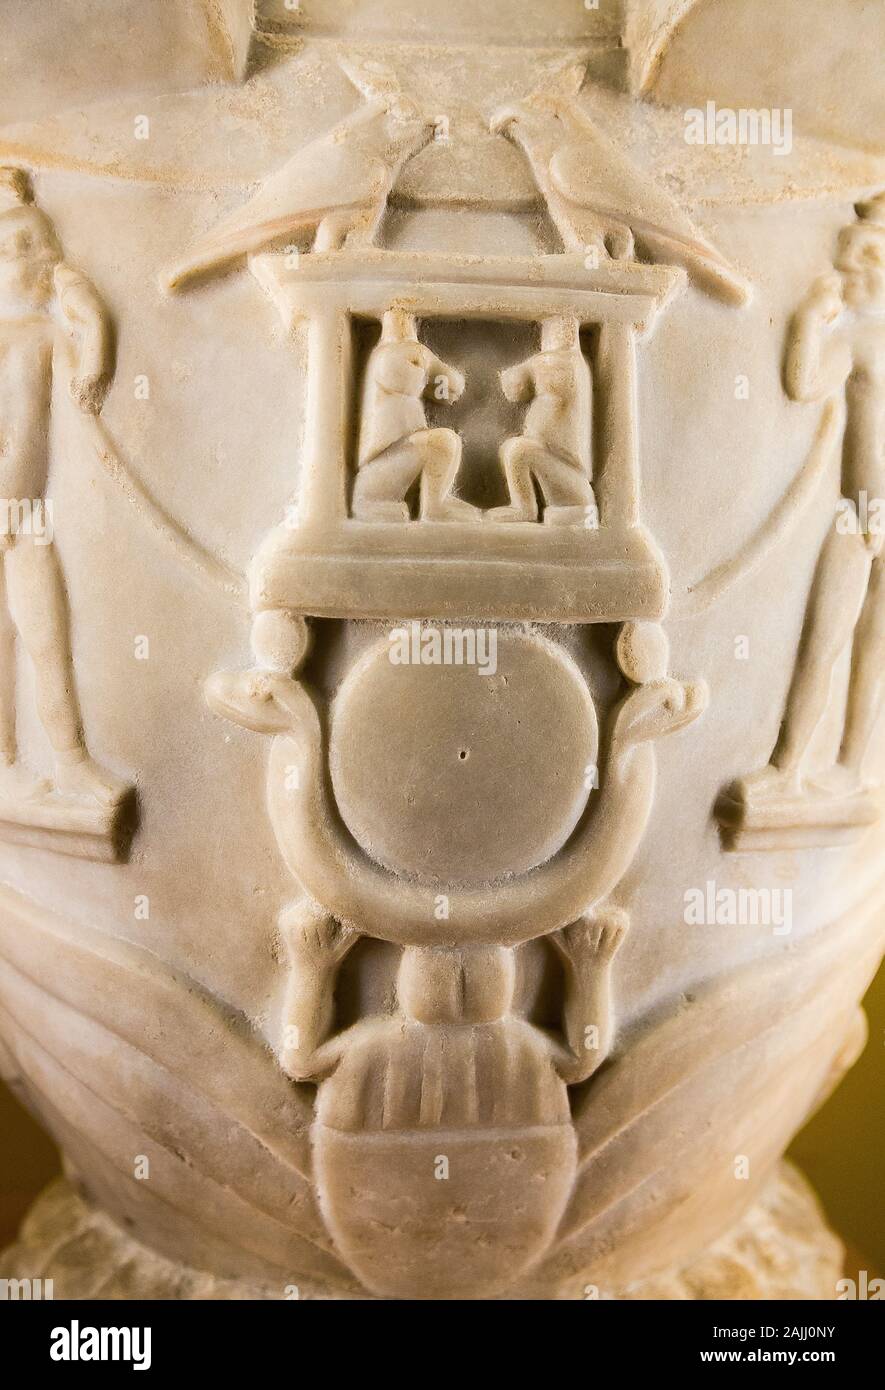 Photo taken during the opening visit of the exhibition “Osiris, Egypt's Sunken Mysteries”. Detail of an Osiris-Canope. Stock Photo